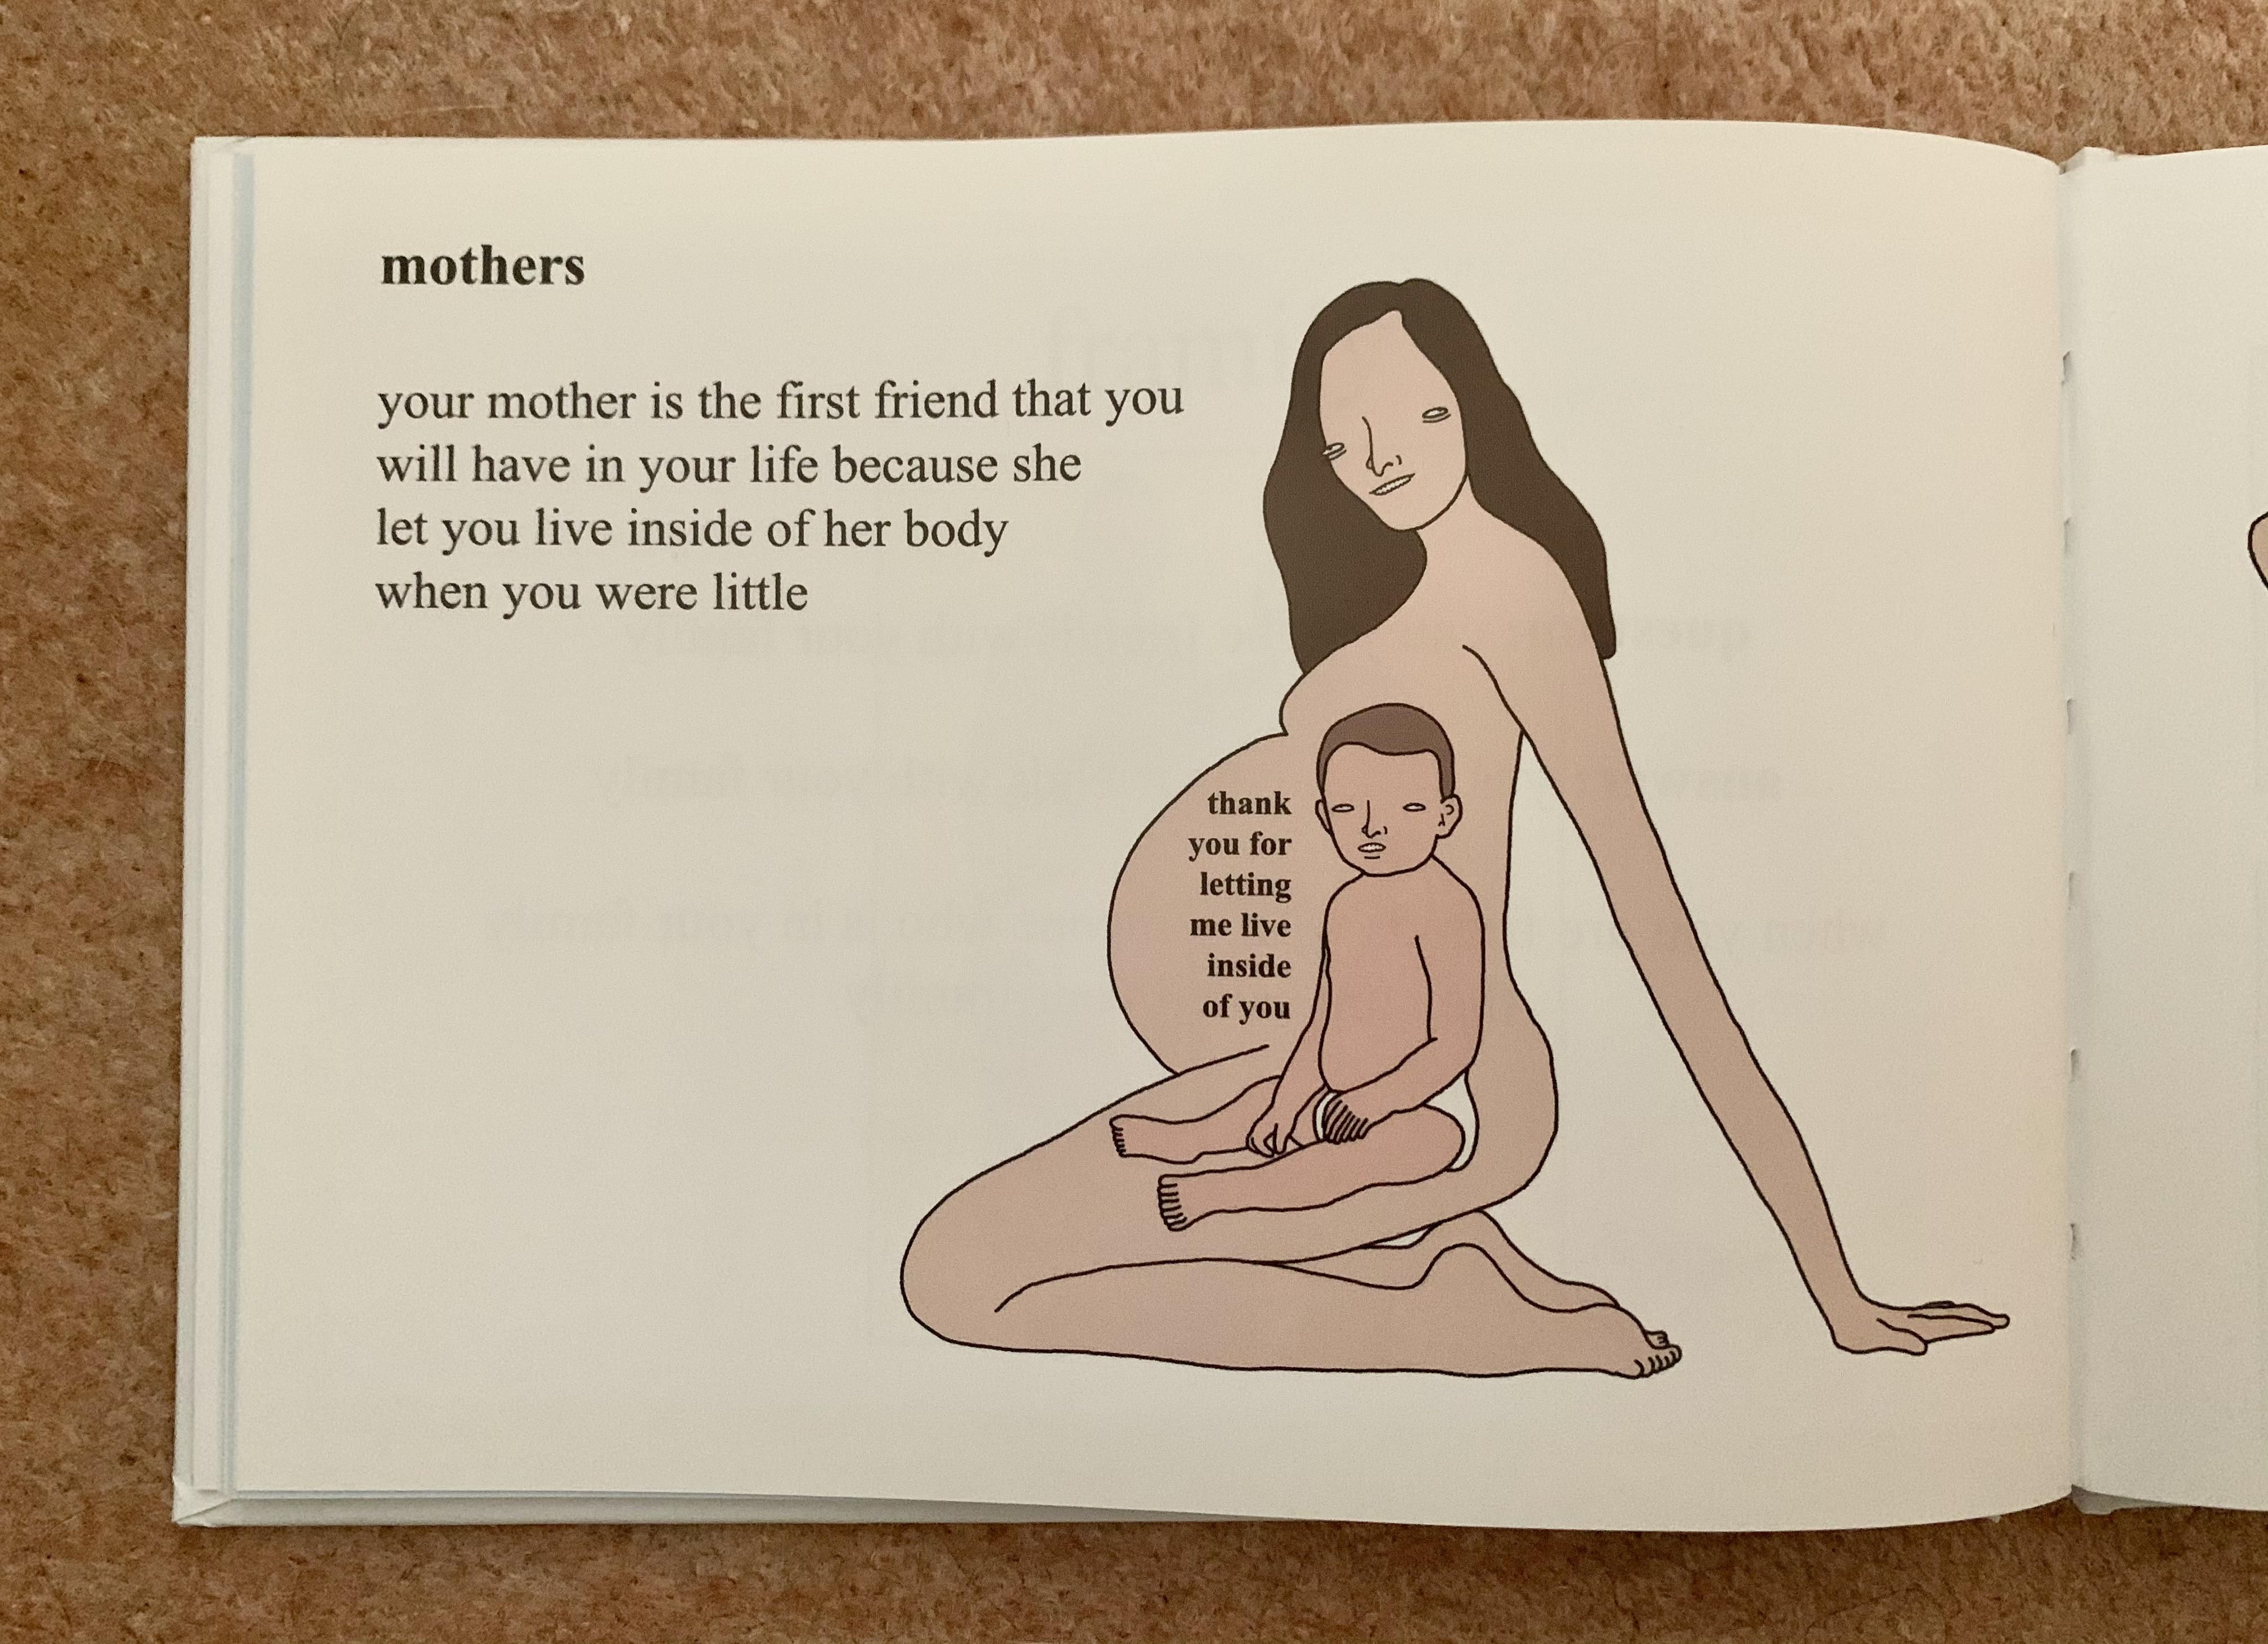 I'm 8 months pregnant and the way the 'baby' in this picture is positioned definitely feels uncomfortably accurate